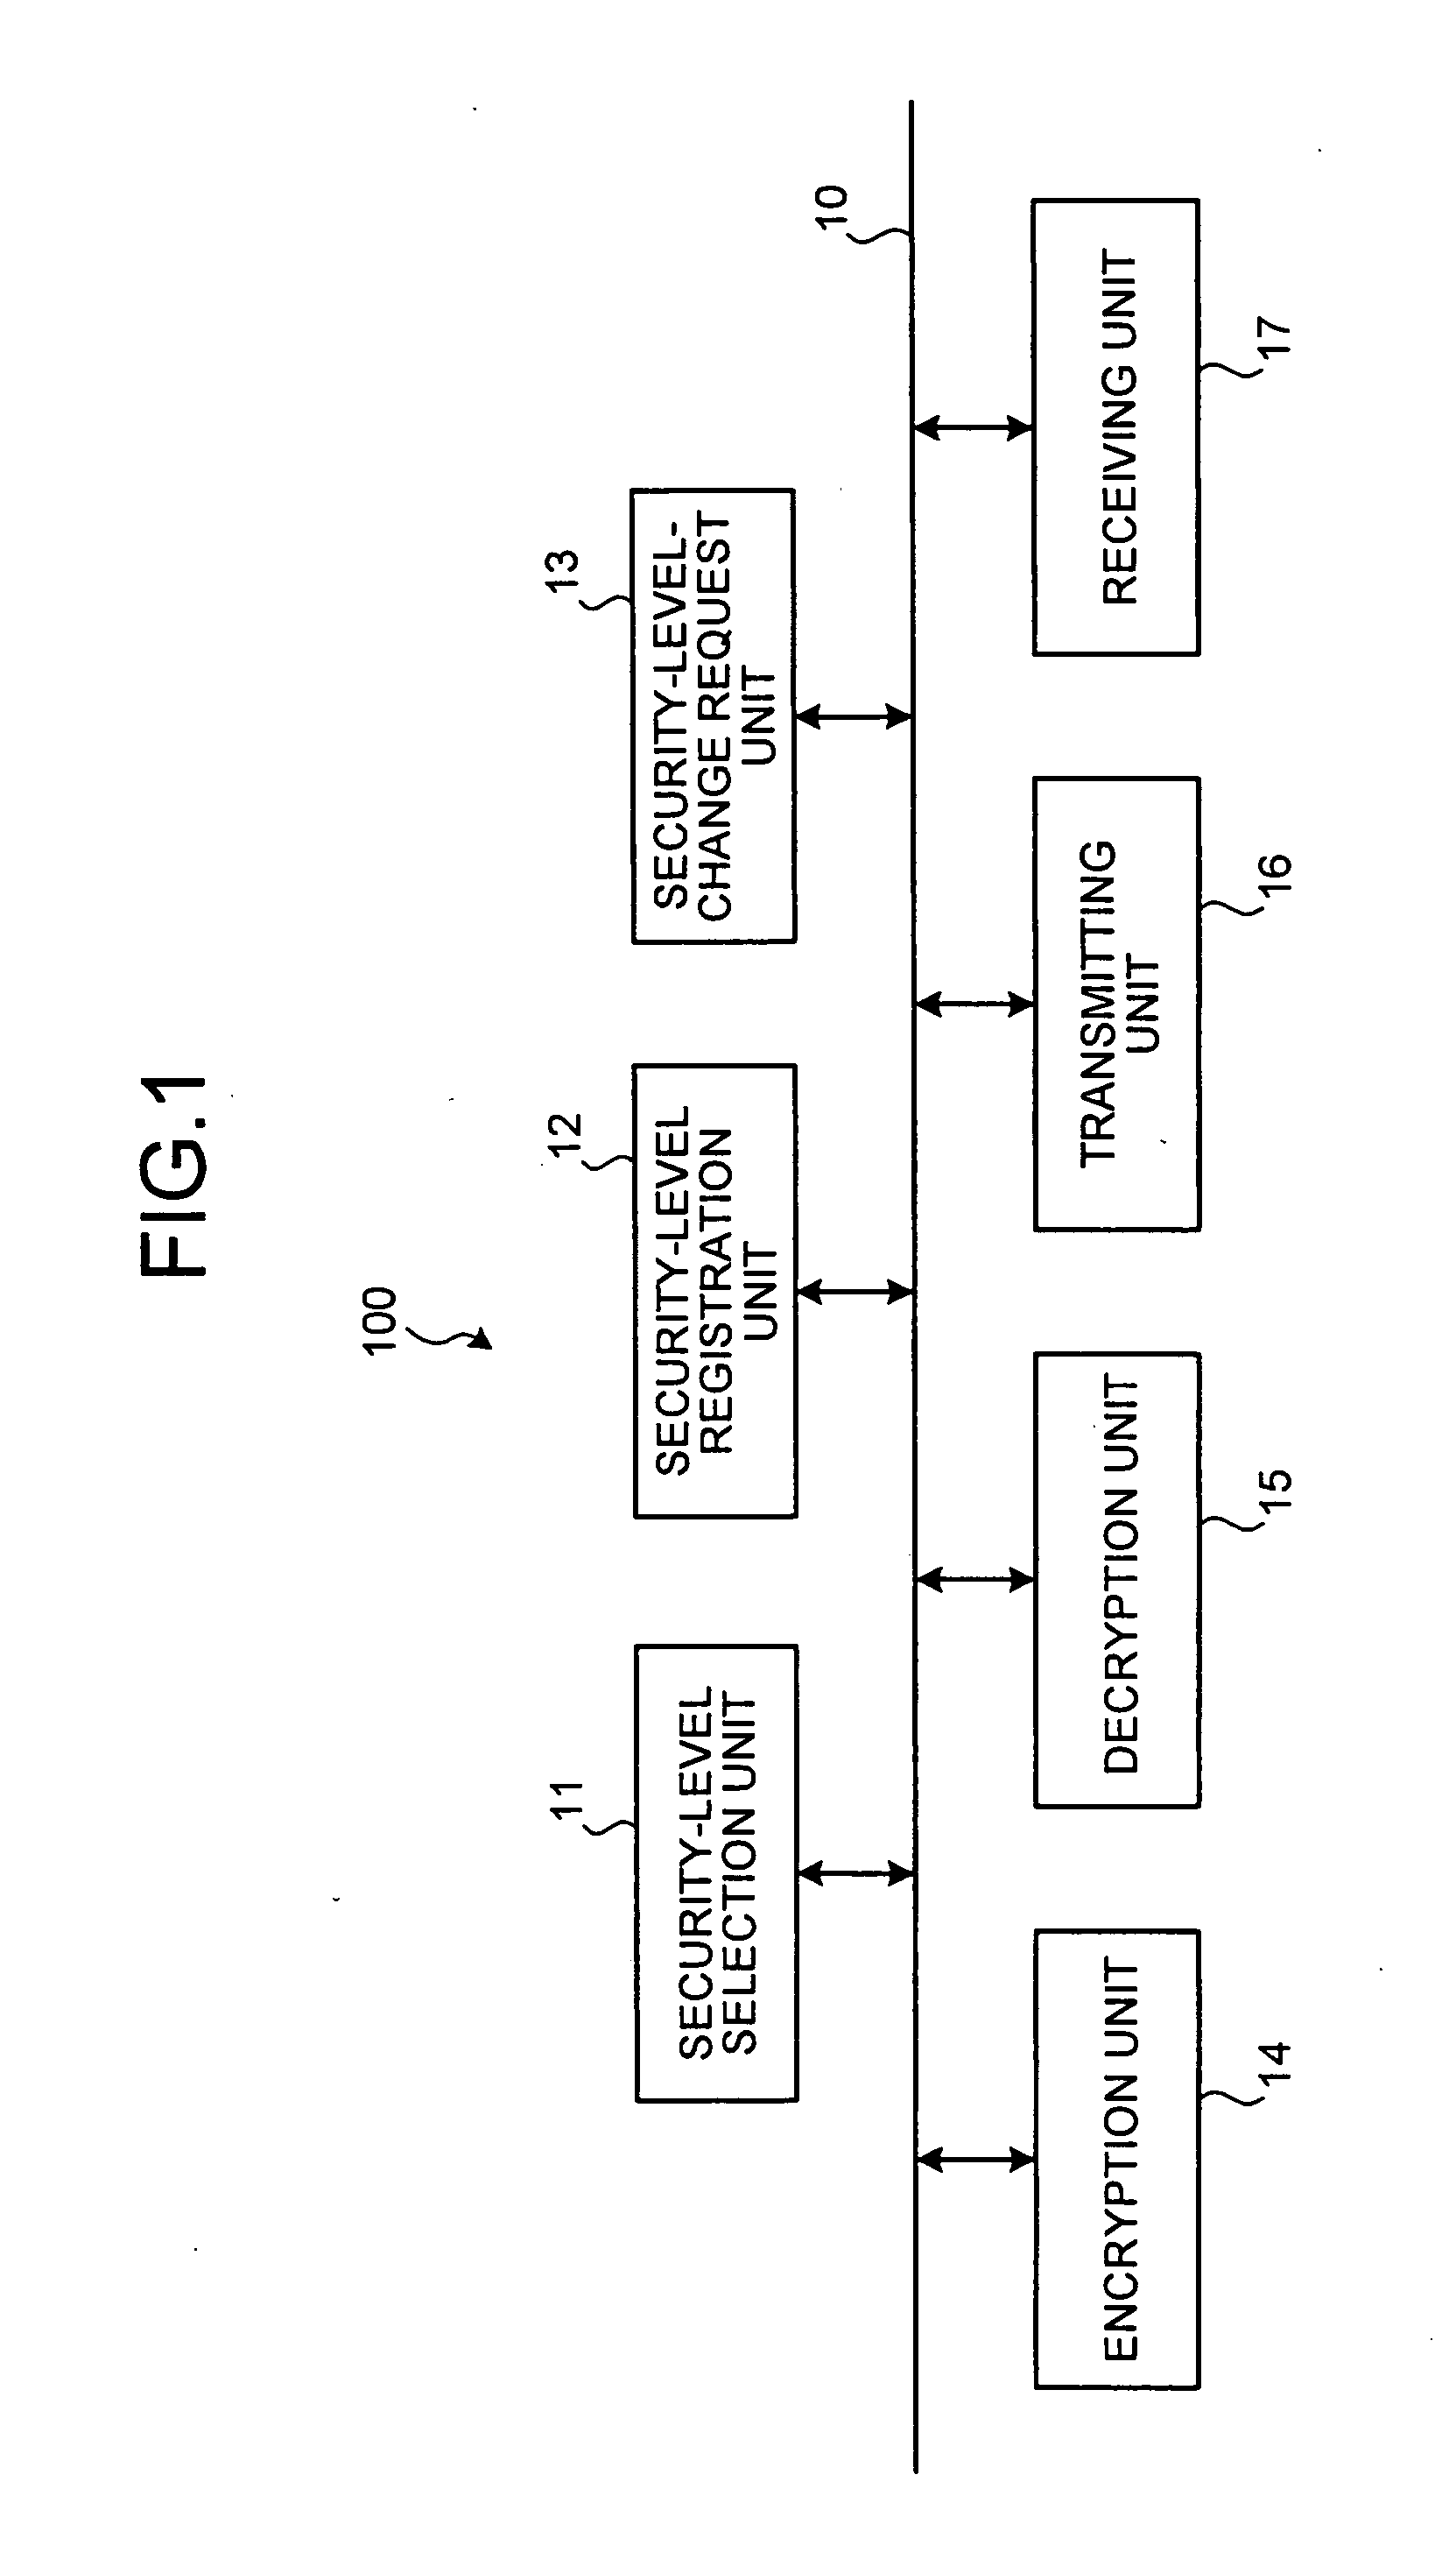 Communication network including mobile radio equipment and radio control system